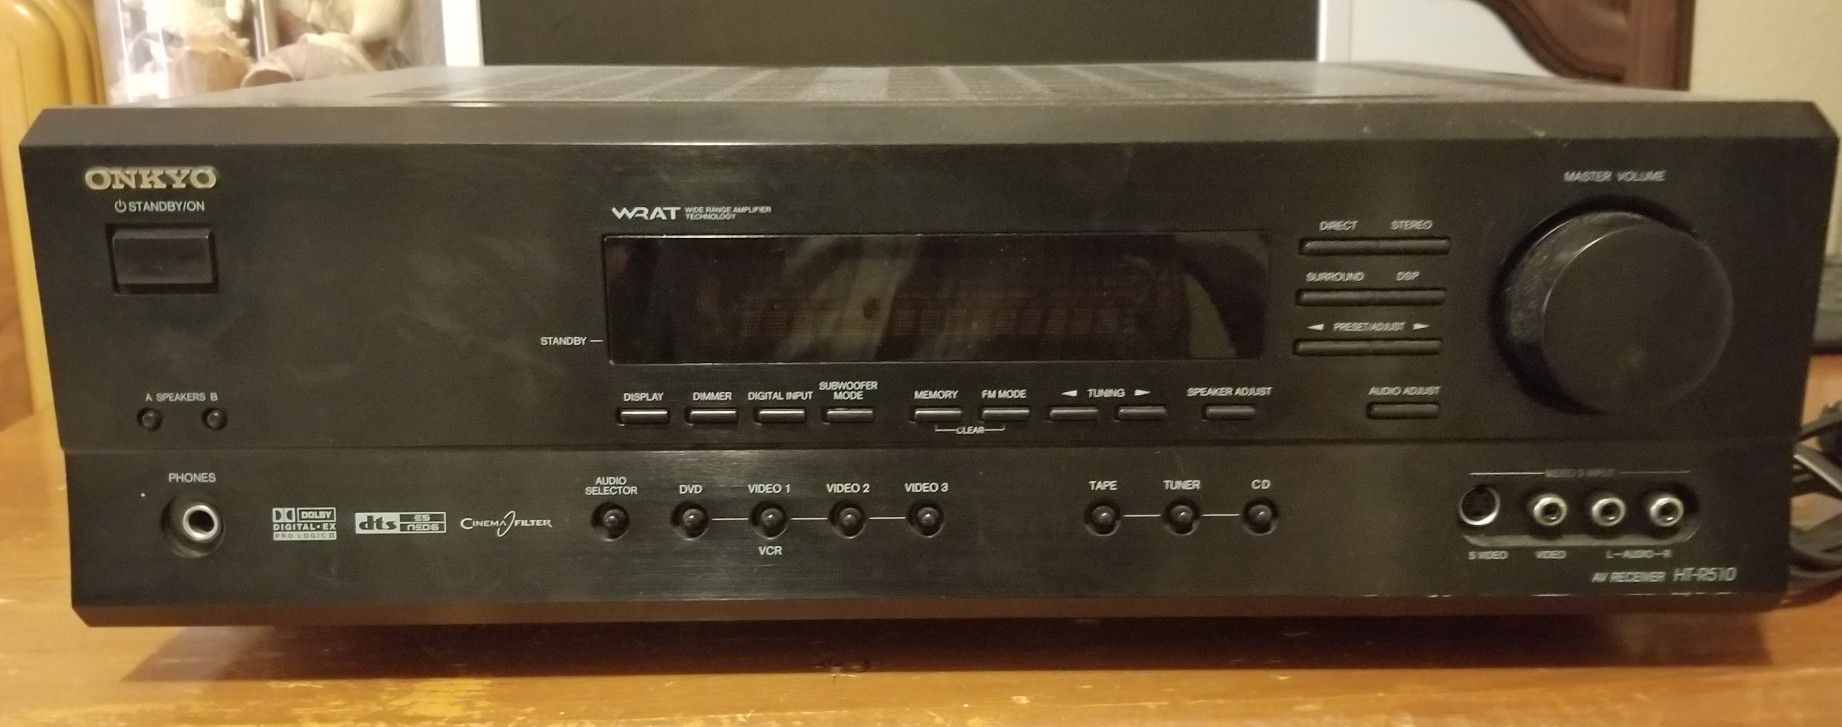 Onkyo Receiver With Speakers